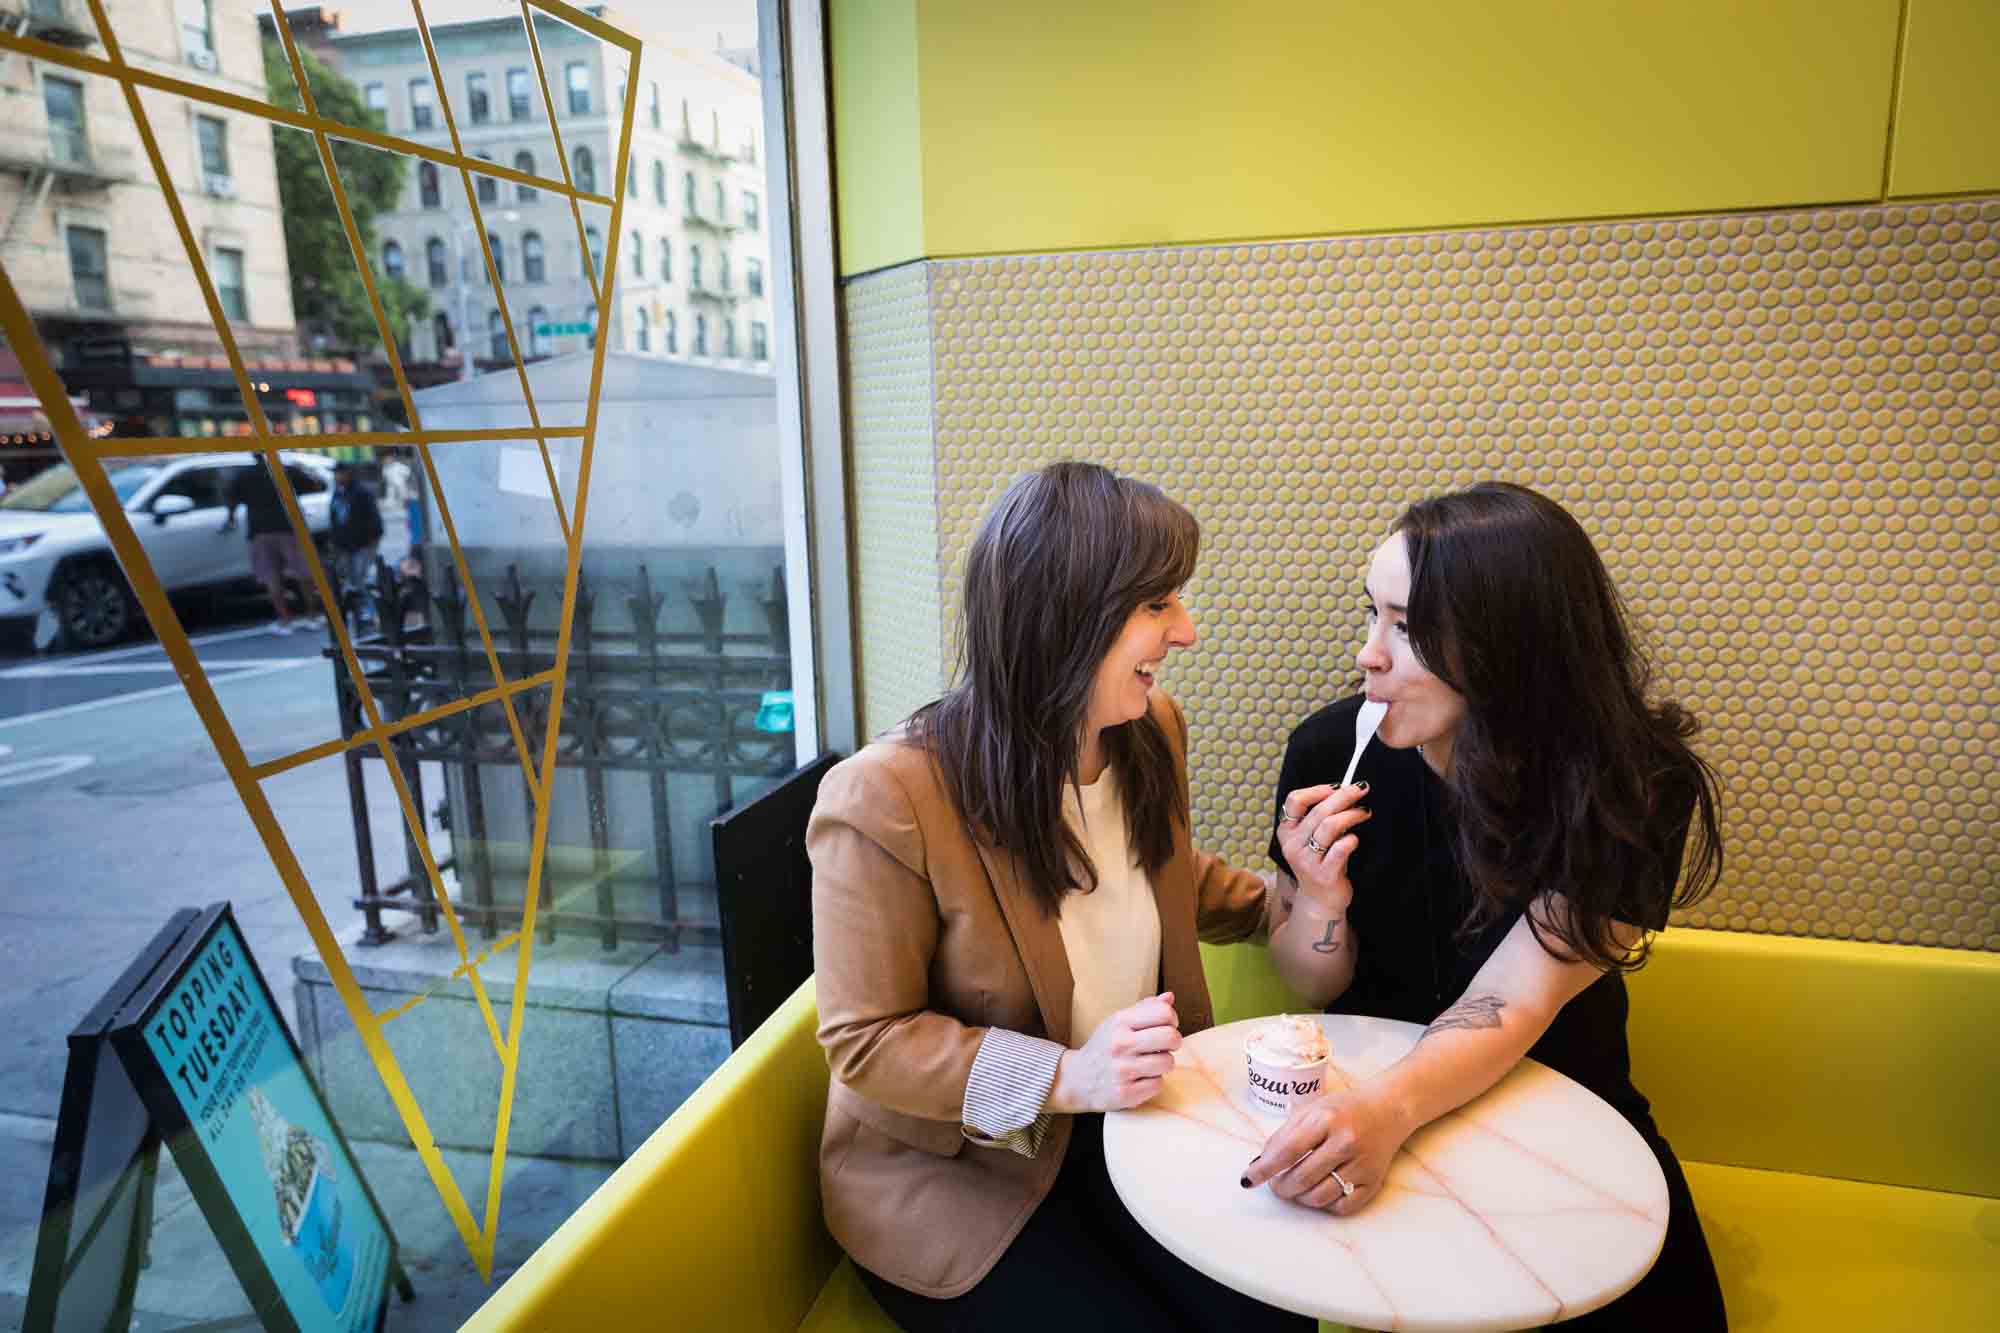 Two women eating ice cream at a table against a yellow wall